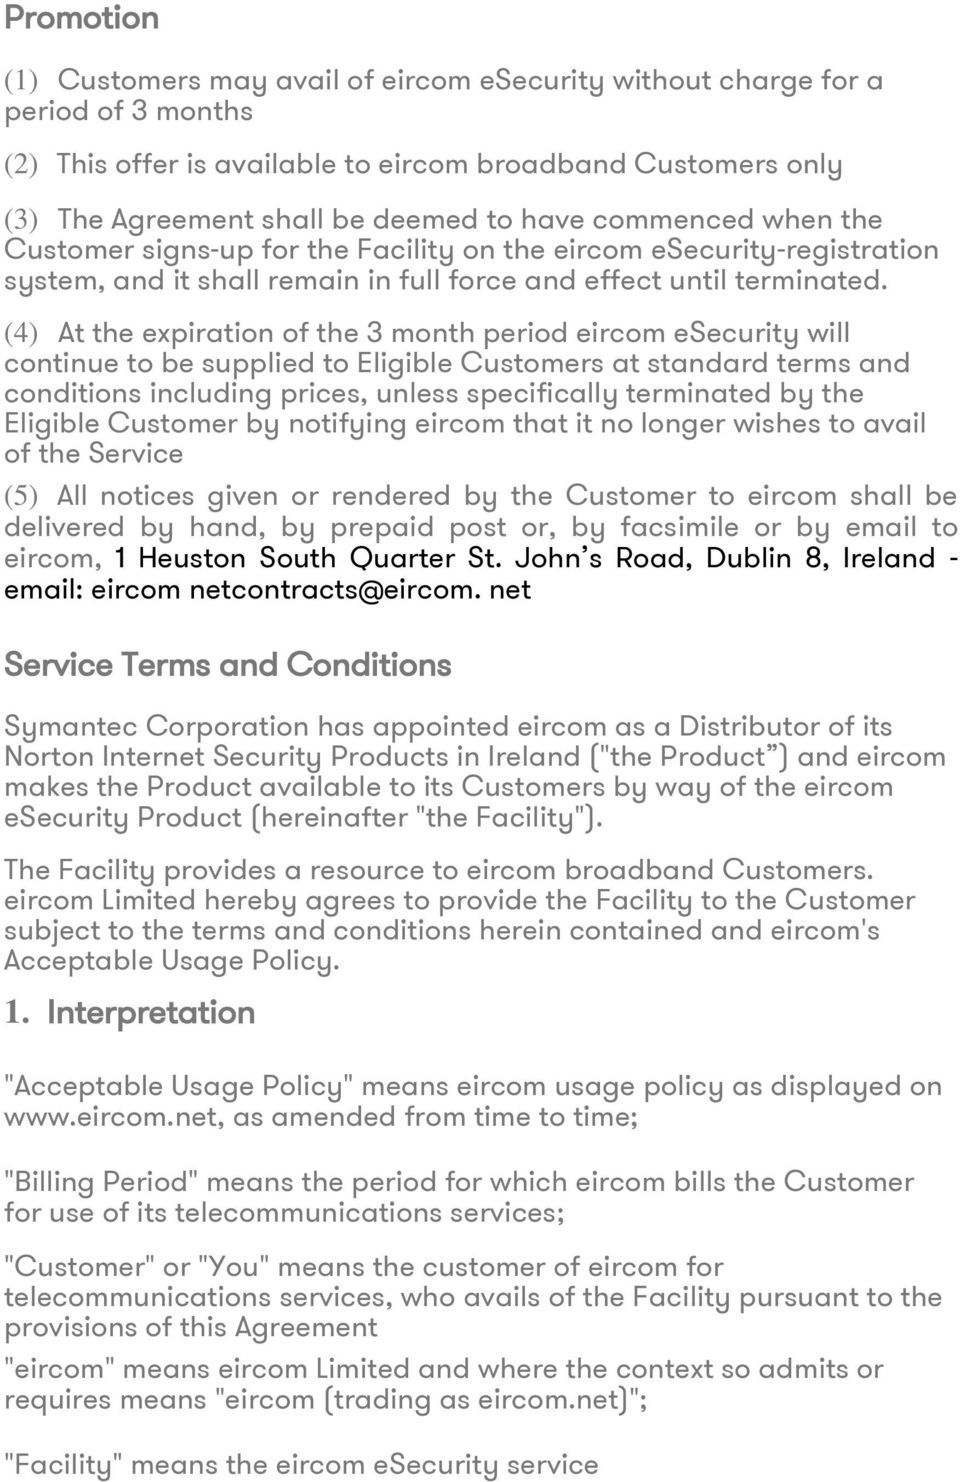 (4) At the expiration of the 3 month period eircom esecurity will continue to be supplied to Eligible Customers at standard terms and conditions including prices, unless specifically terminated by